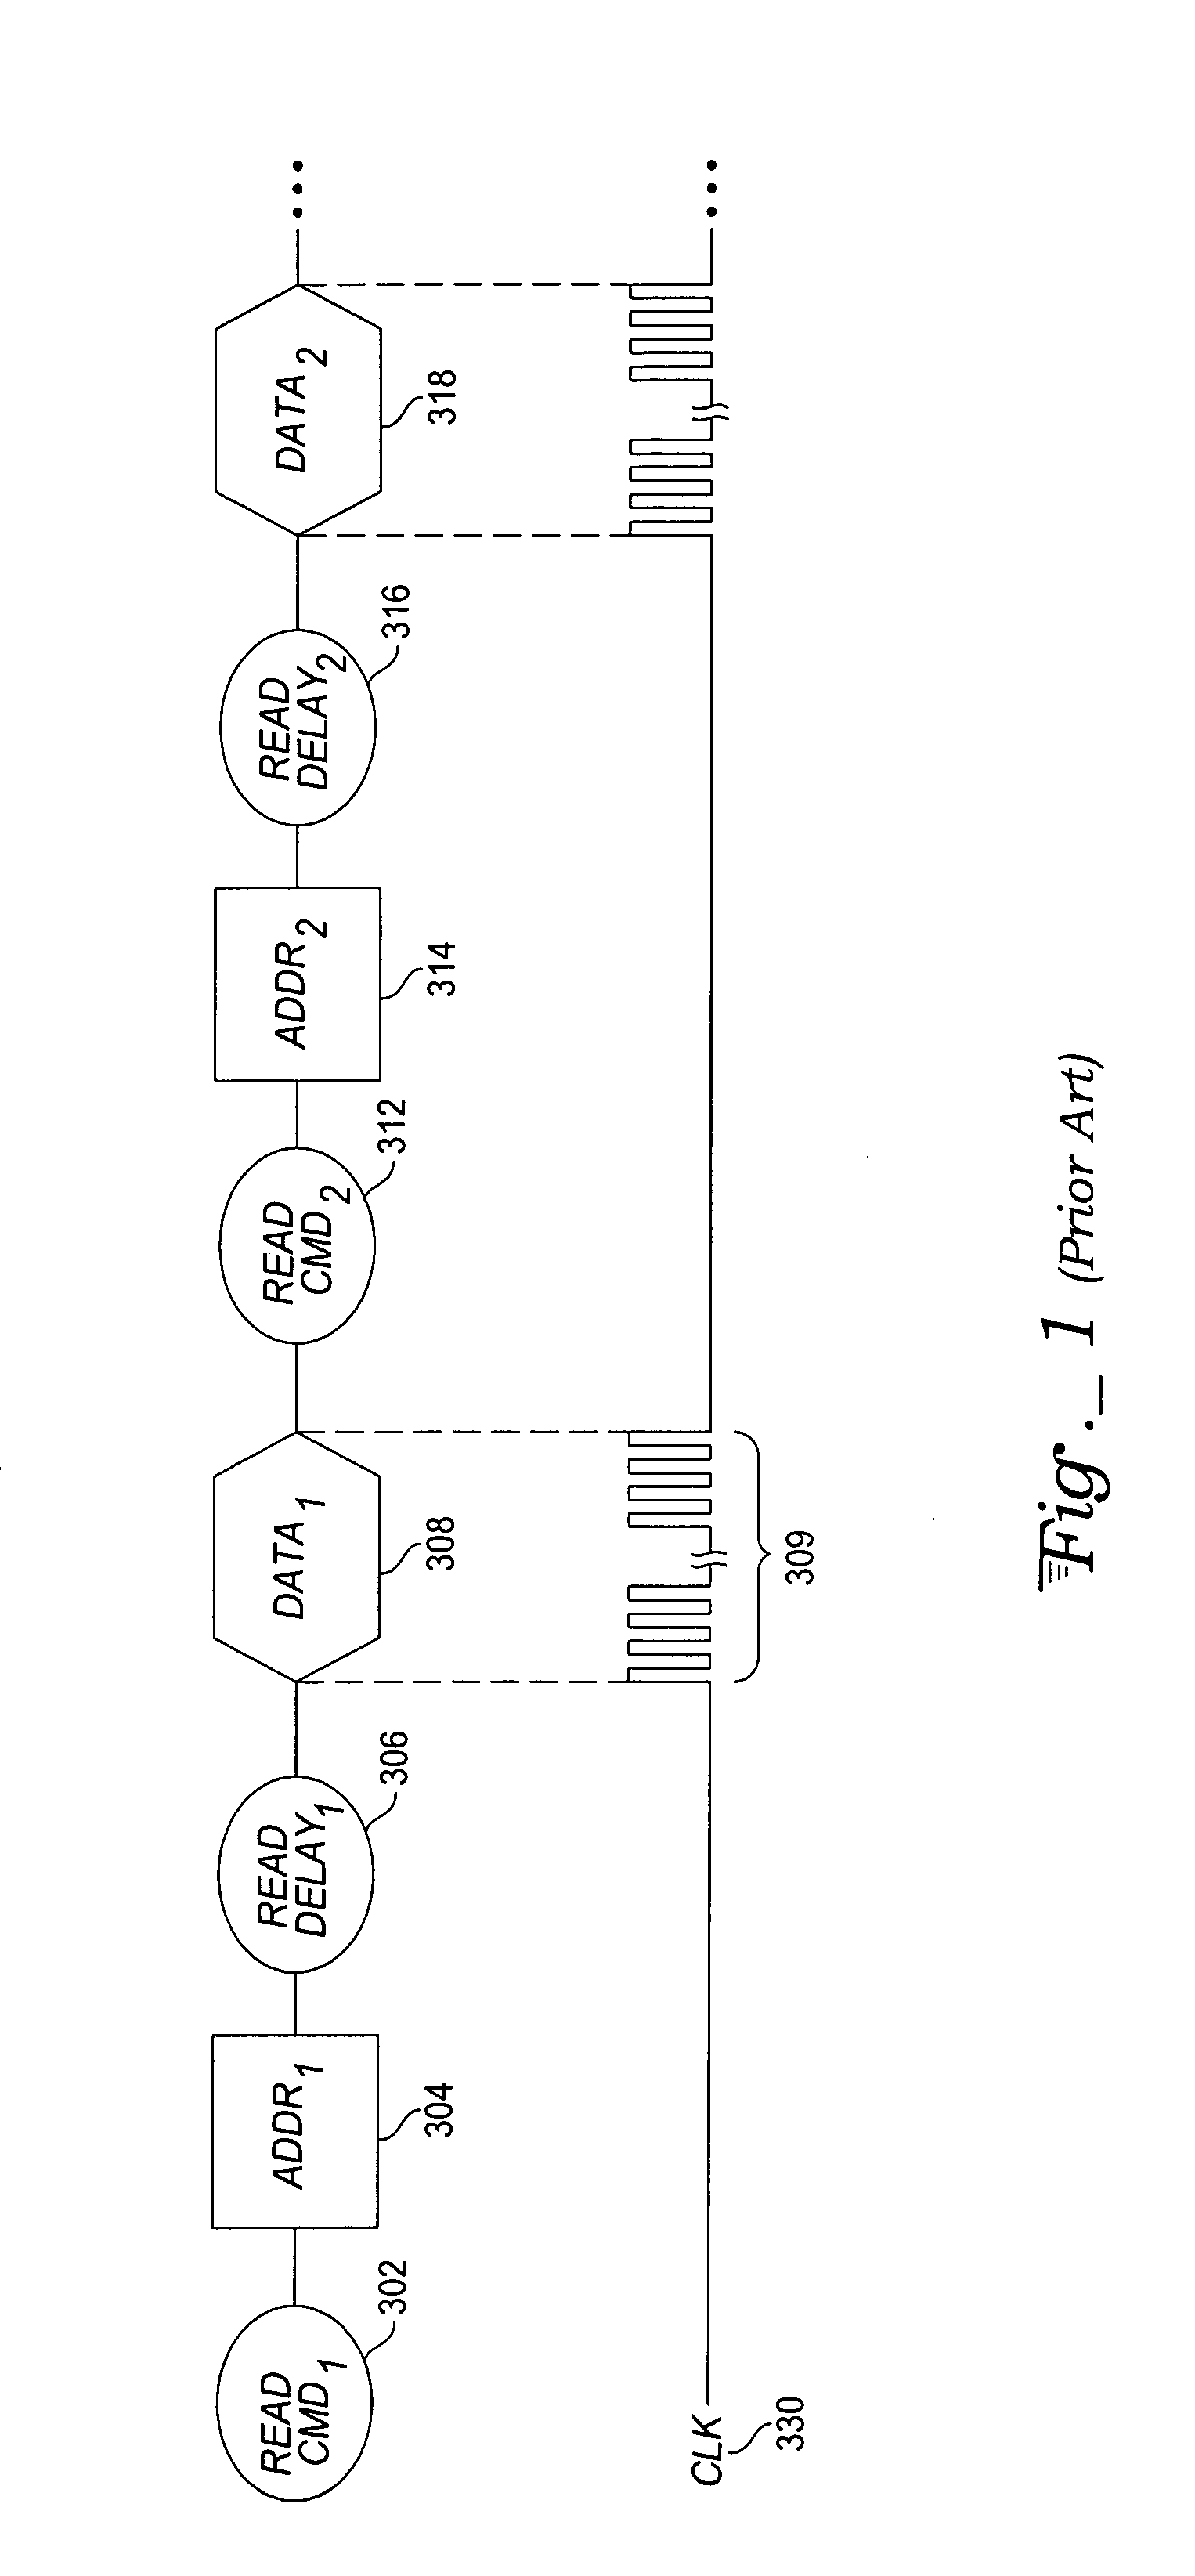 Simultaneous pipelined read with dual level cache for improved system performance using flash technology